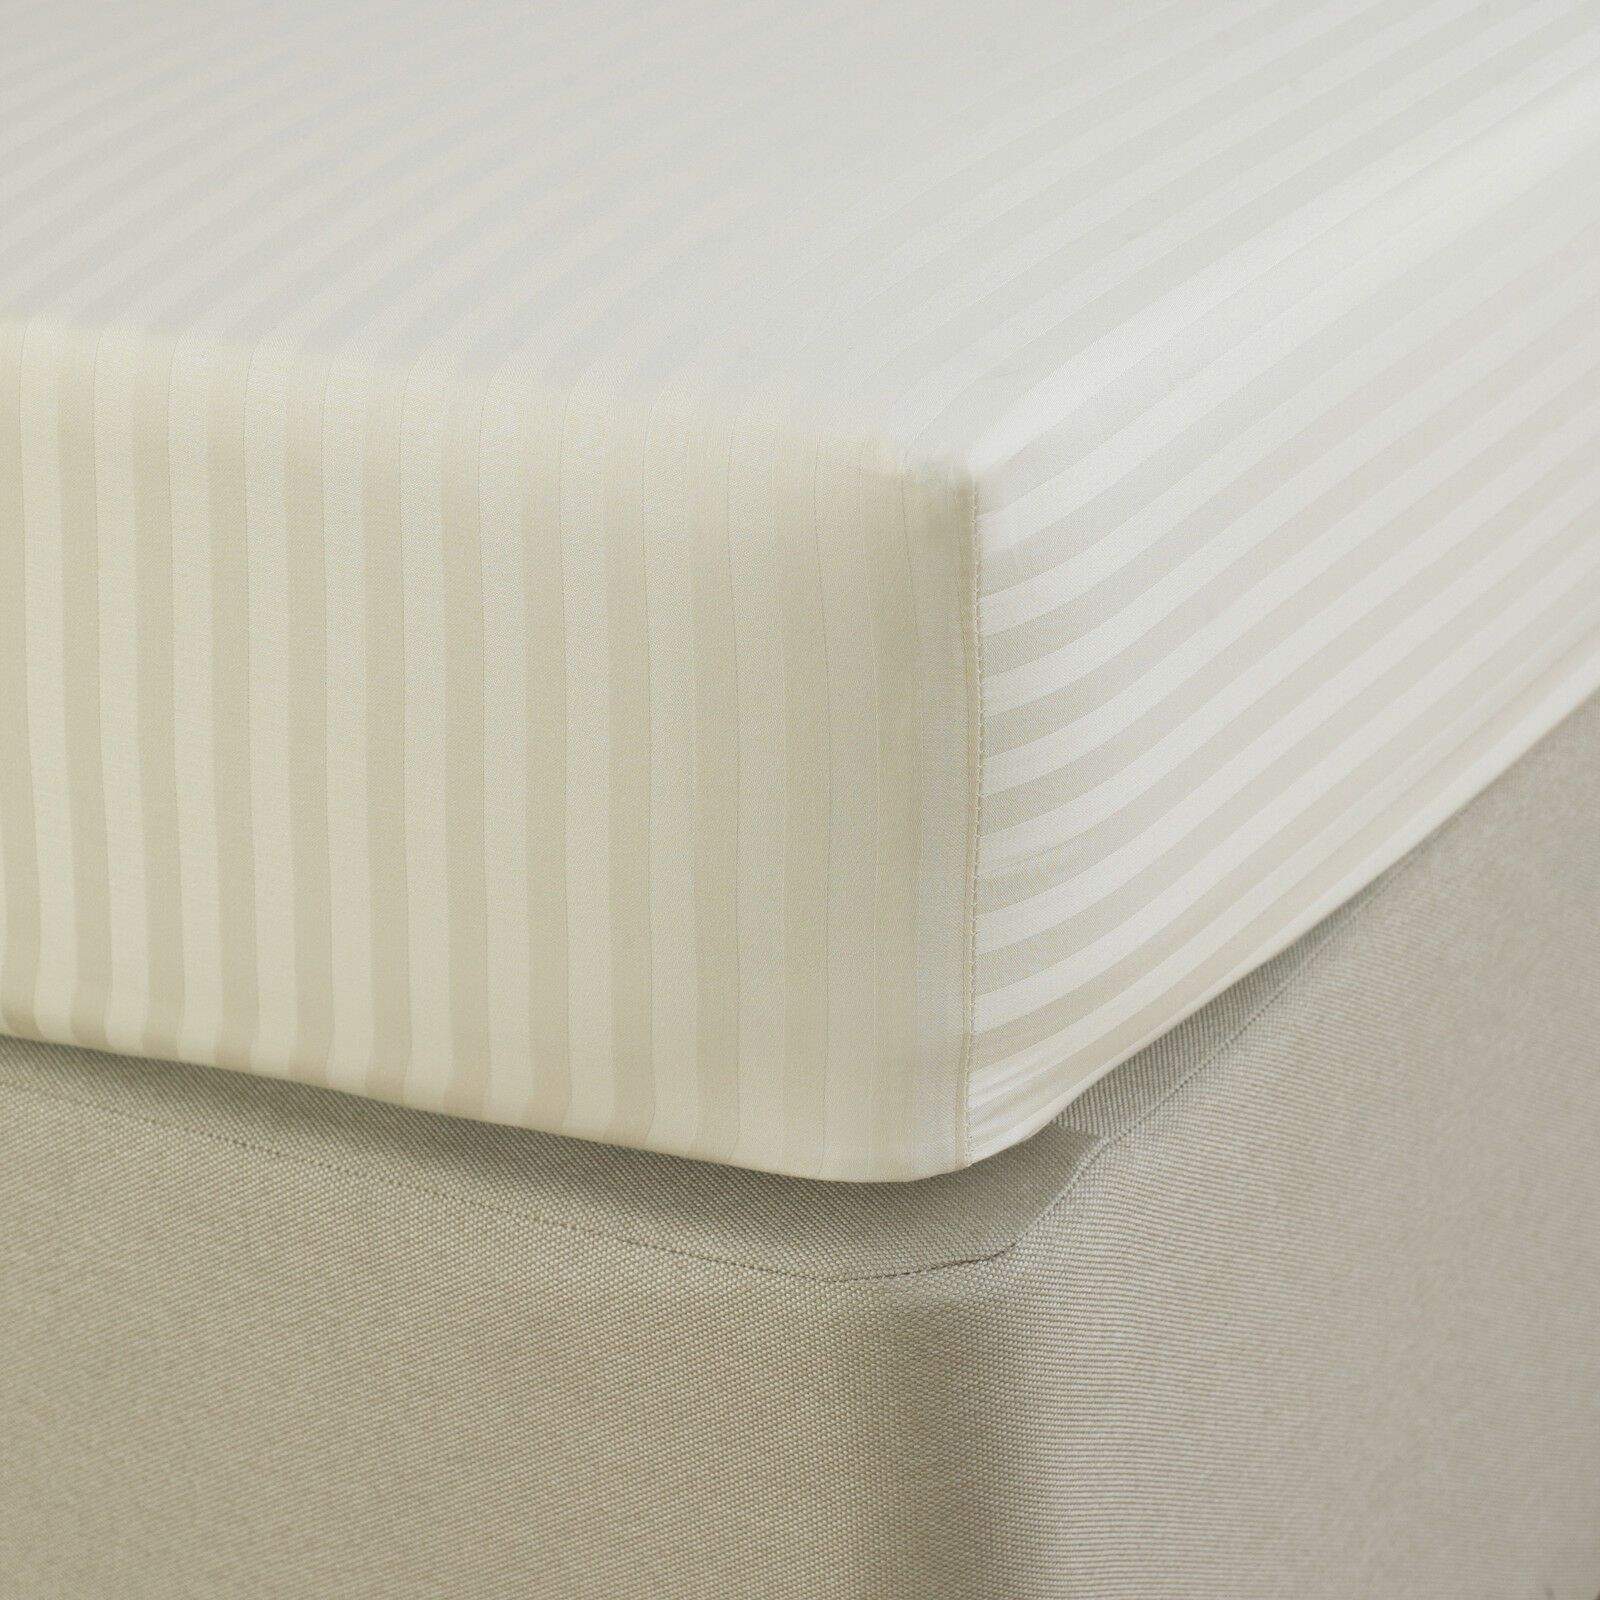 PREMIUM FITTED SHEET 100% EGYPTIAN COTTON SATIN STRIPE 12"30CM BED SHEETS Bed and Bath Linen